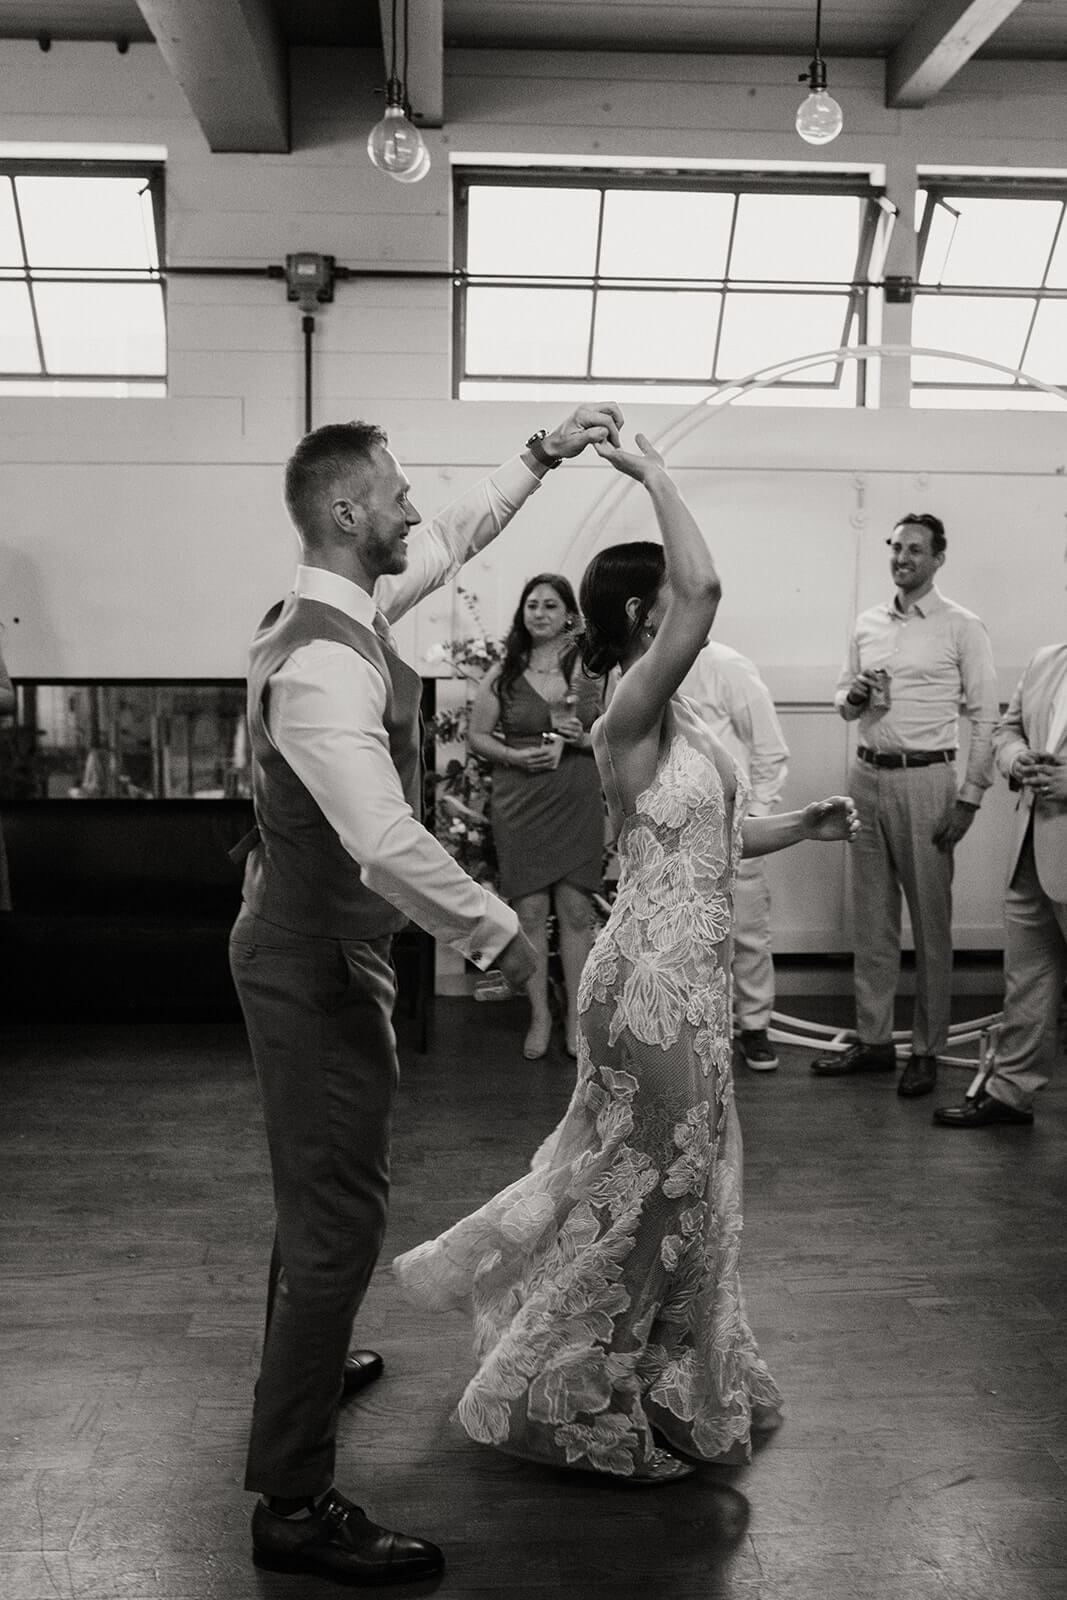 Bride and groom first dance at industrial wedding reception in Seattle